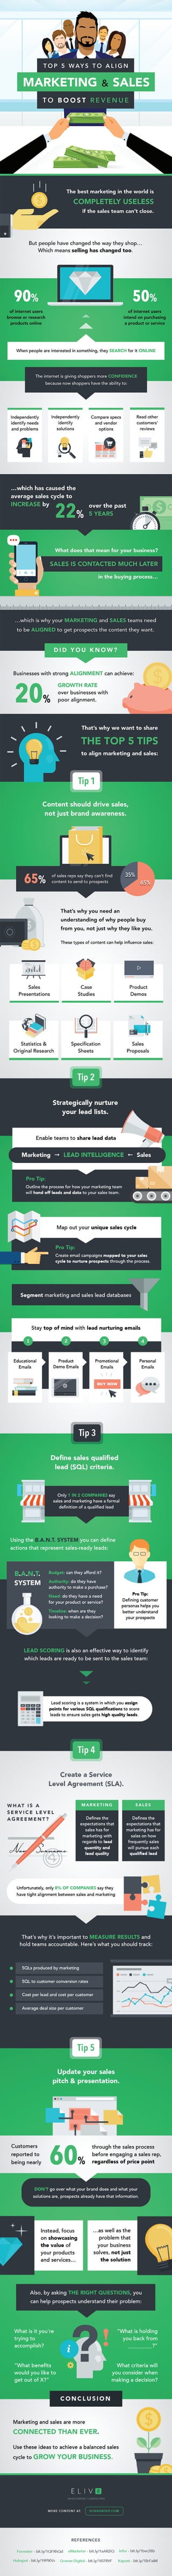 How-To Align Marketing & Sales to Boost Revenue (Infographic)